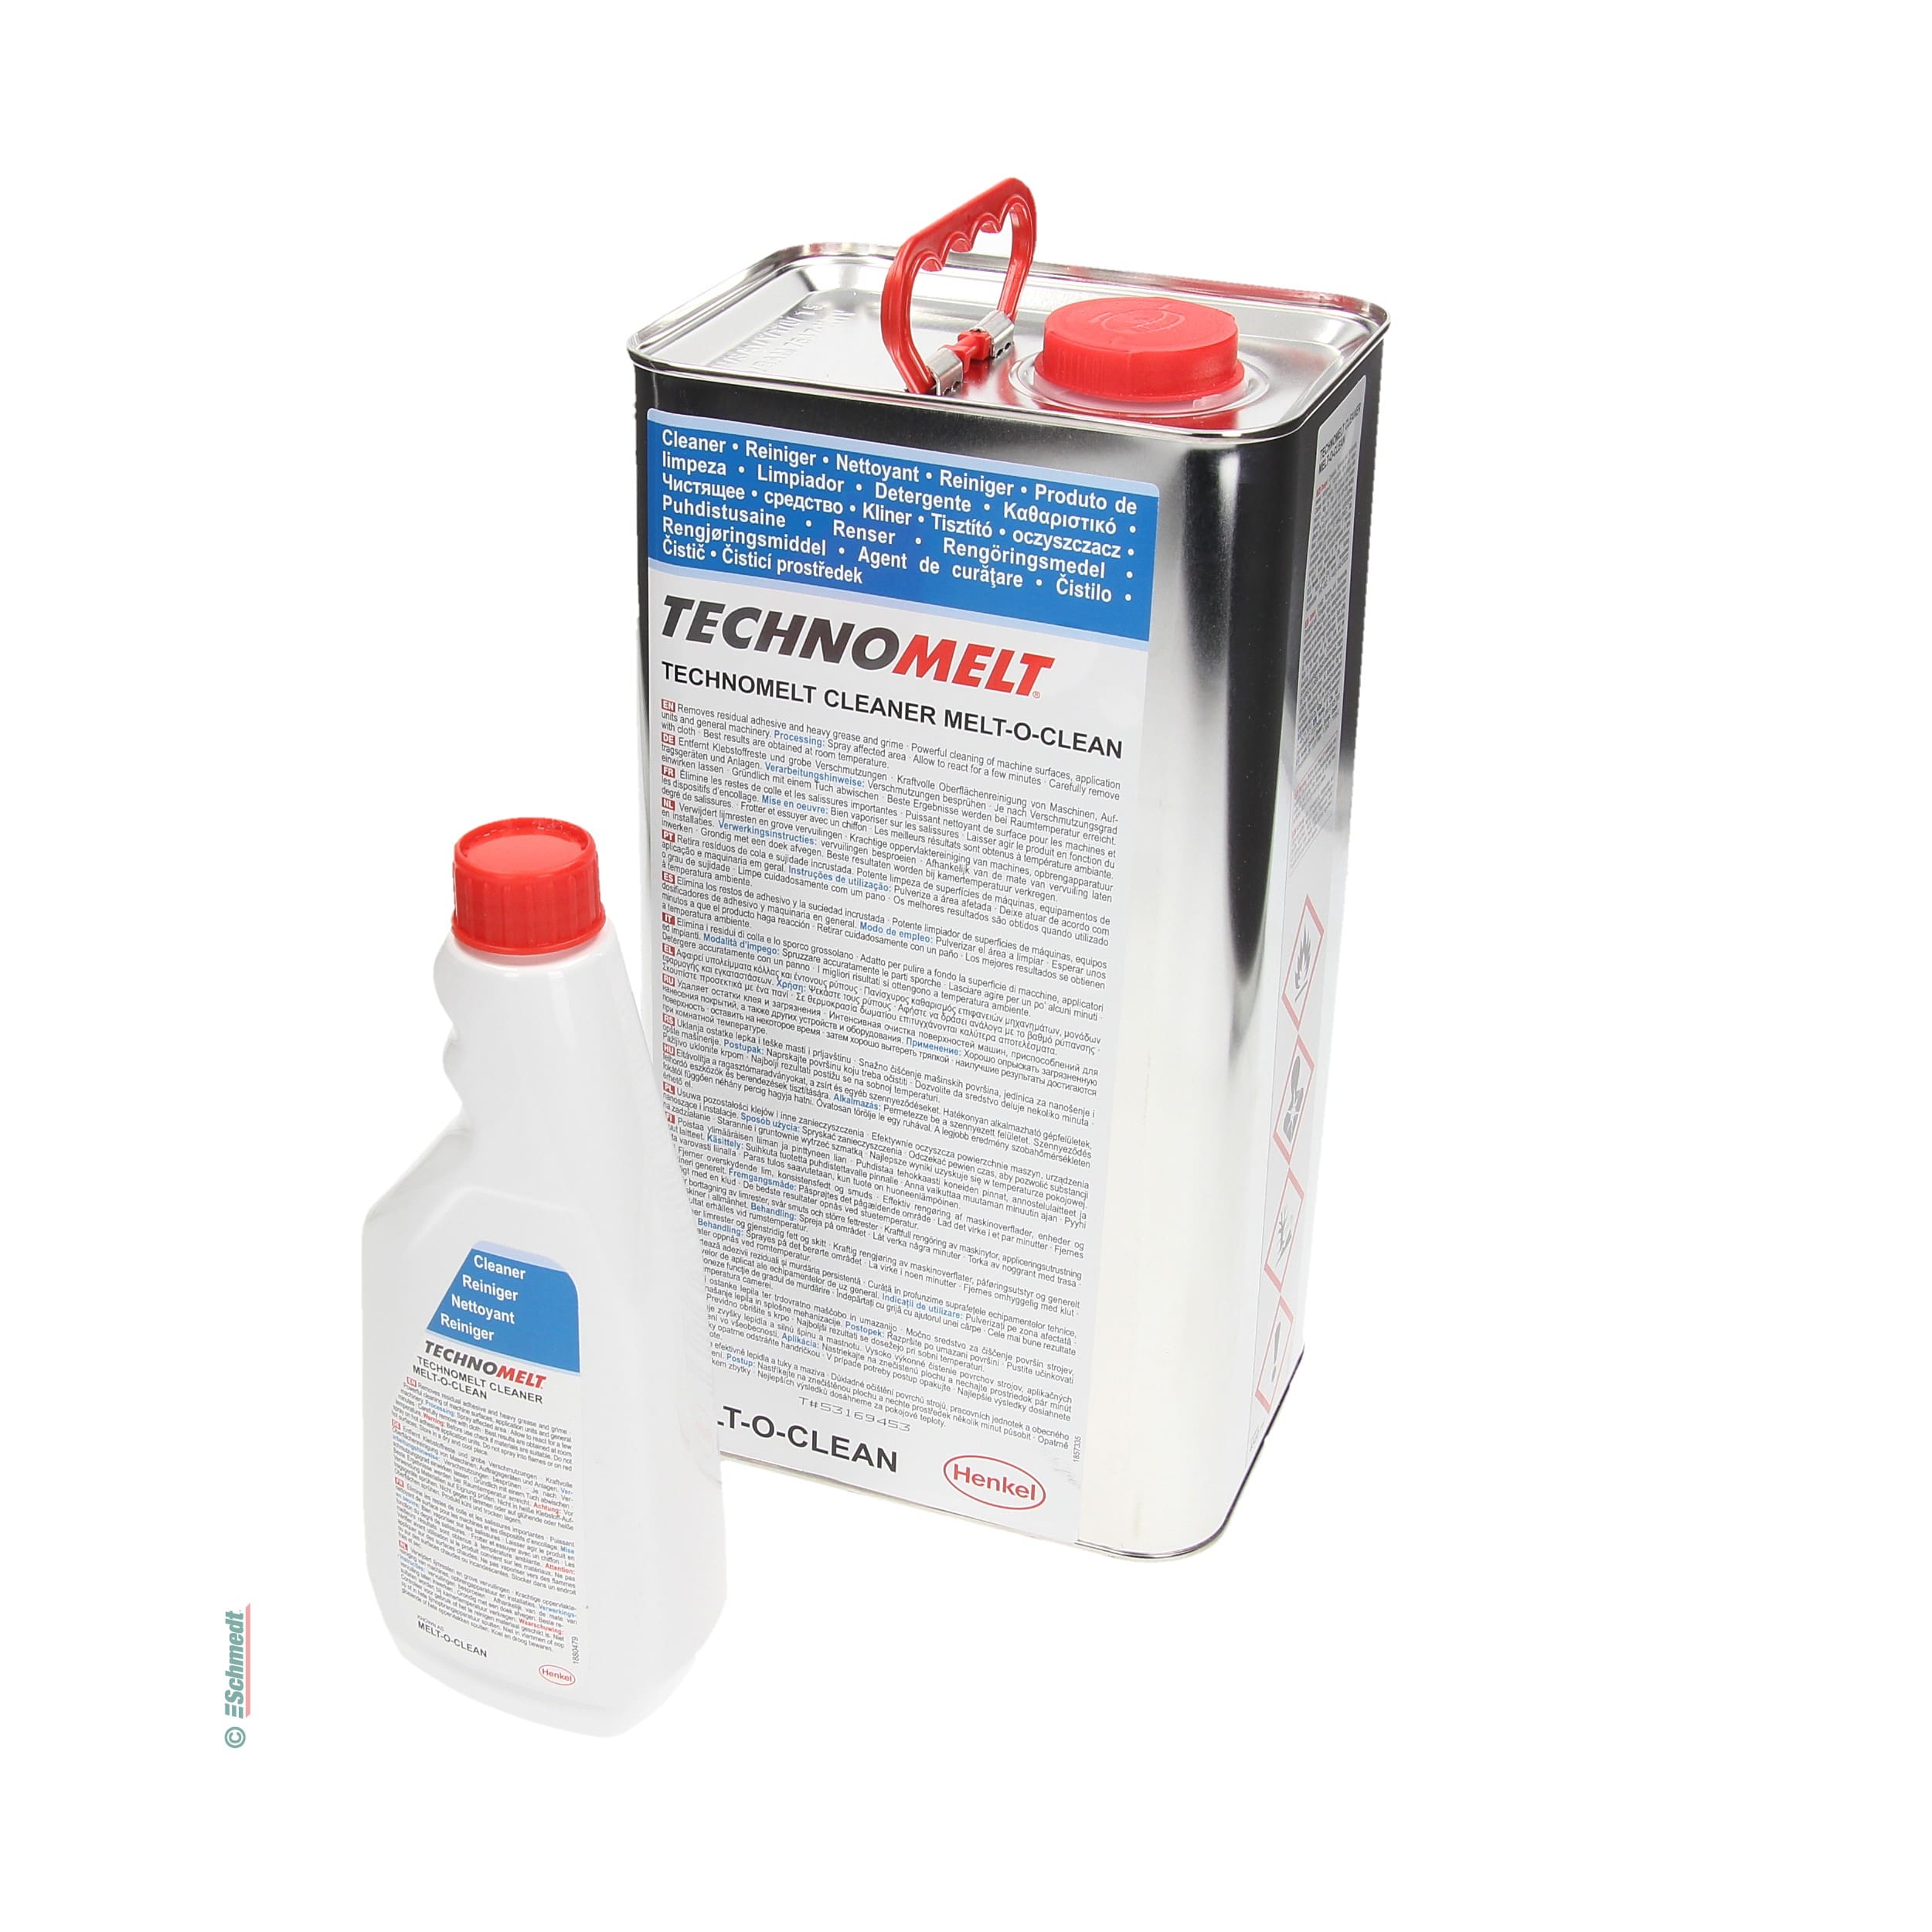 Melt-O-Clean - Cold-cleaning agent - to remove persistant stains, especially dispersion and hotmelt glue residues...